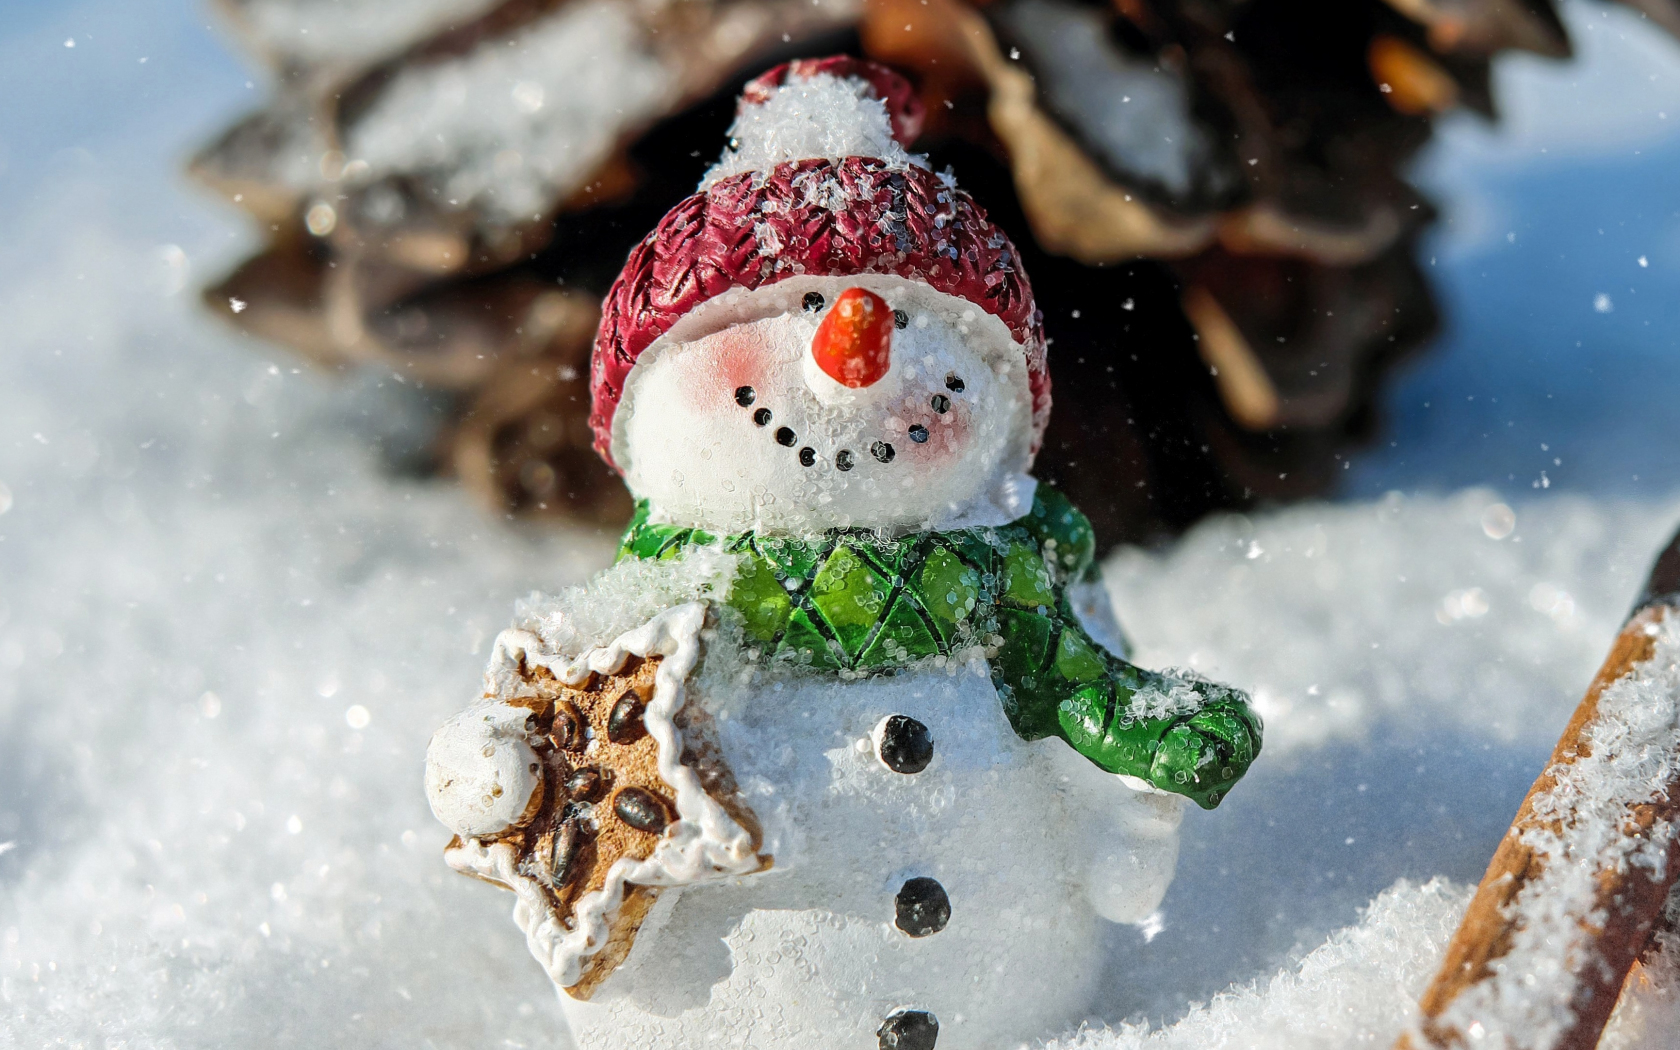 Download wallpaper 1680x1050 winter, snowman, funny, holiday, christmas, 16:10 widescreen 1680x1050 HD background, 16048